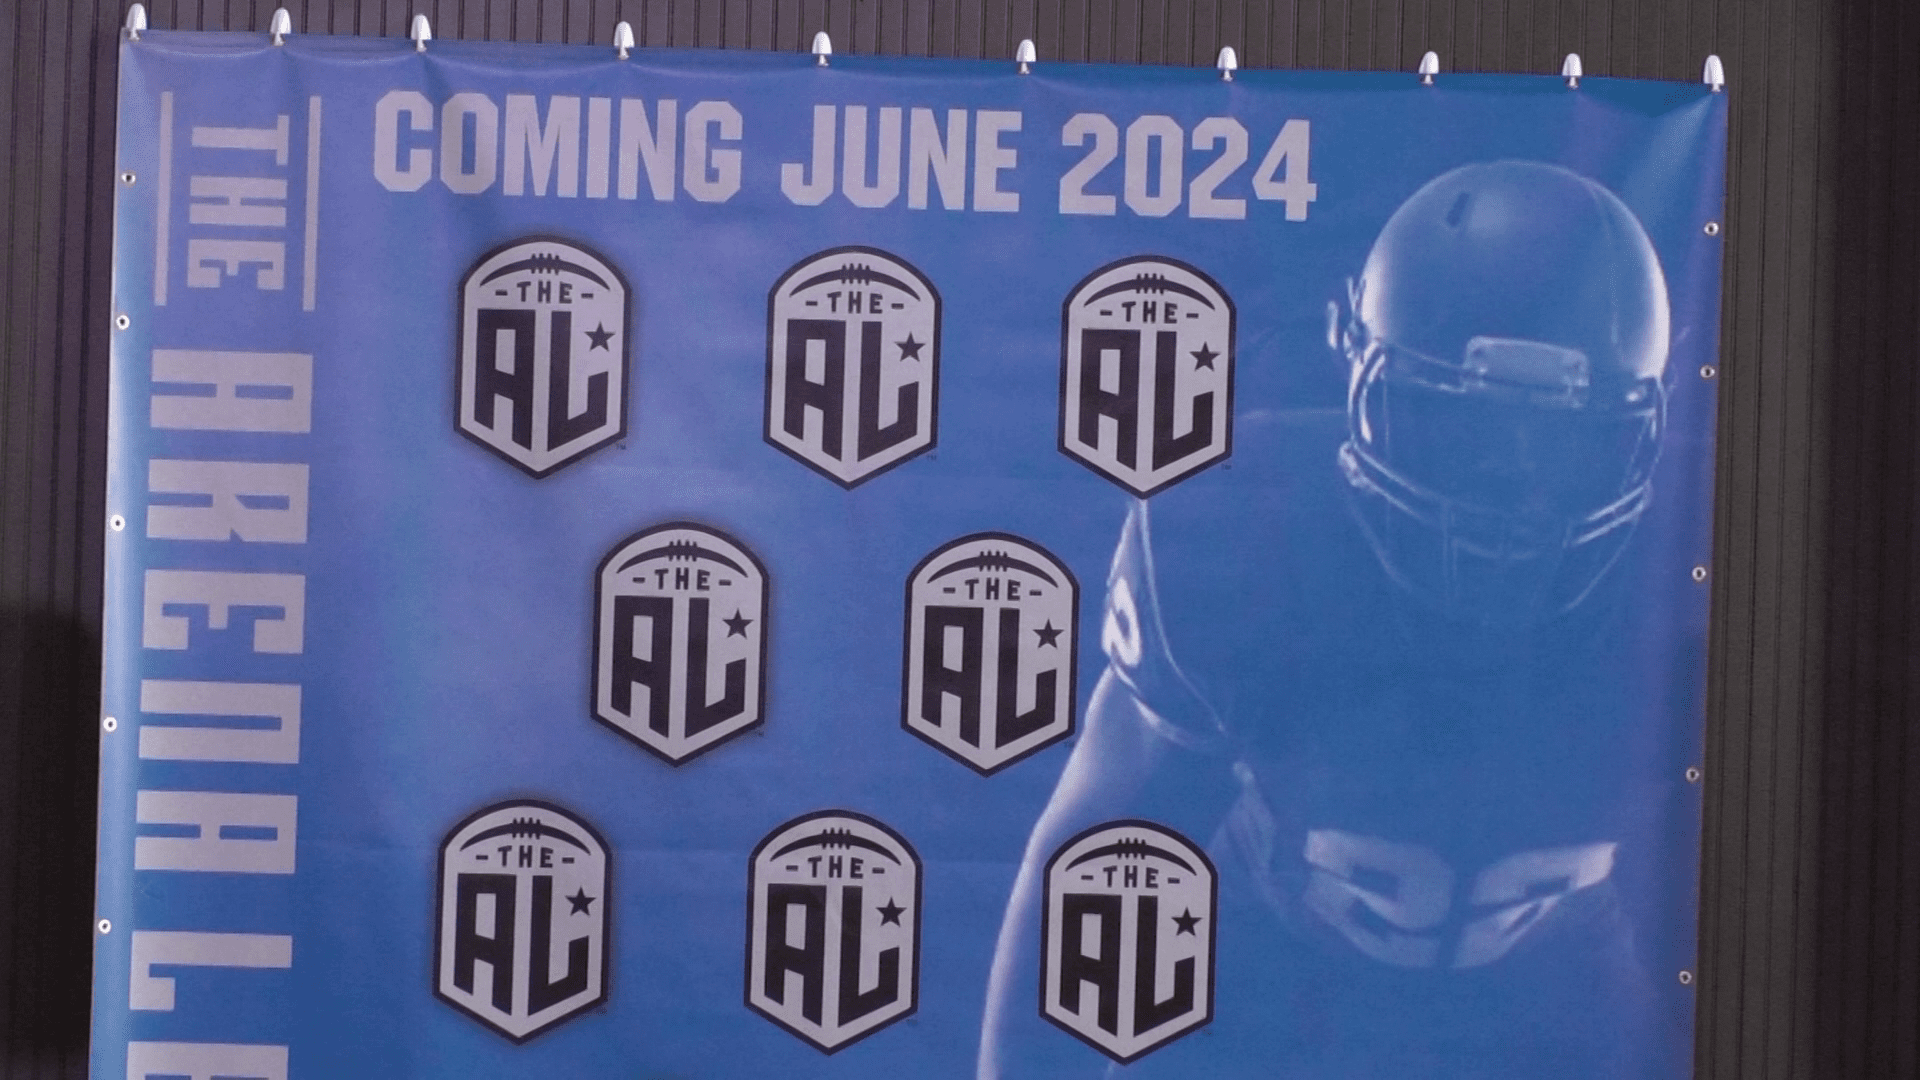 Arena Football is coming to Duluth